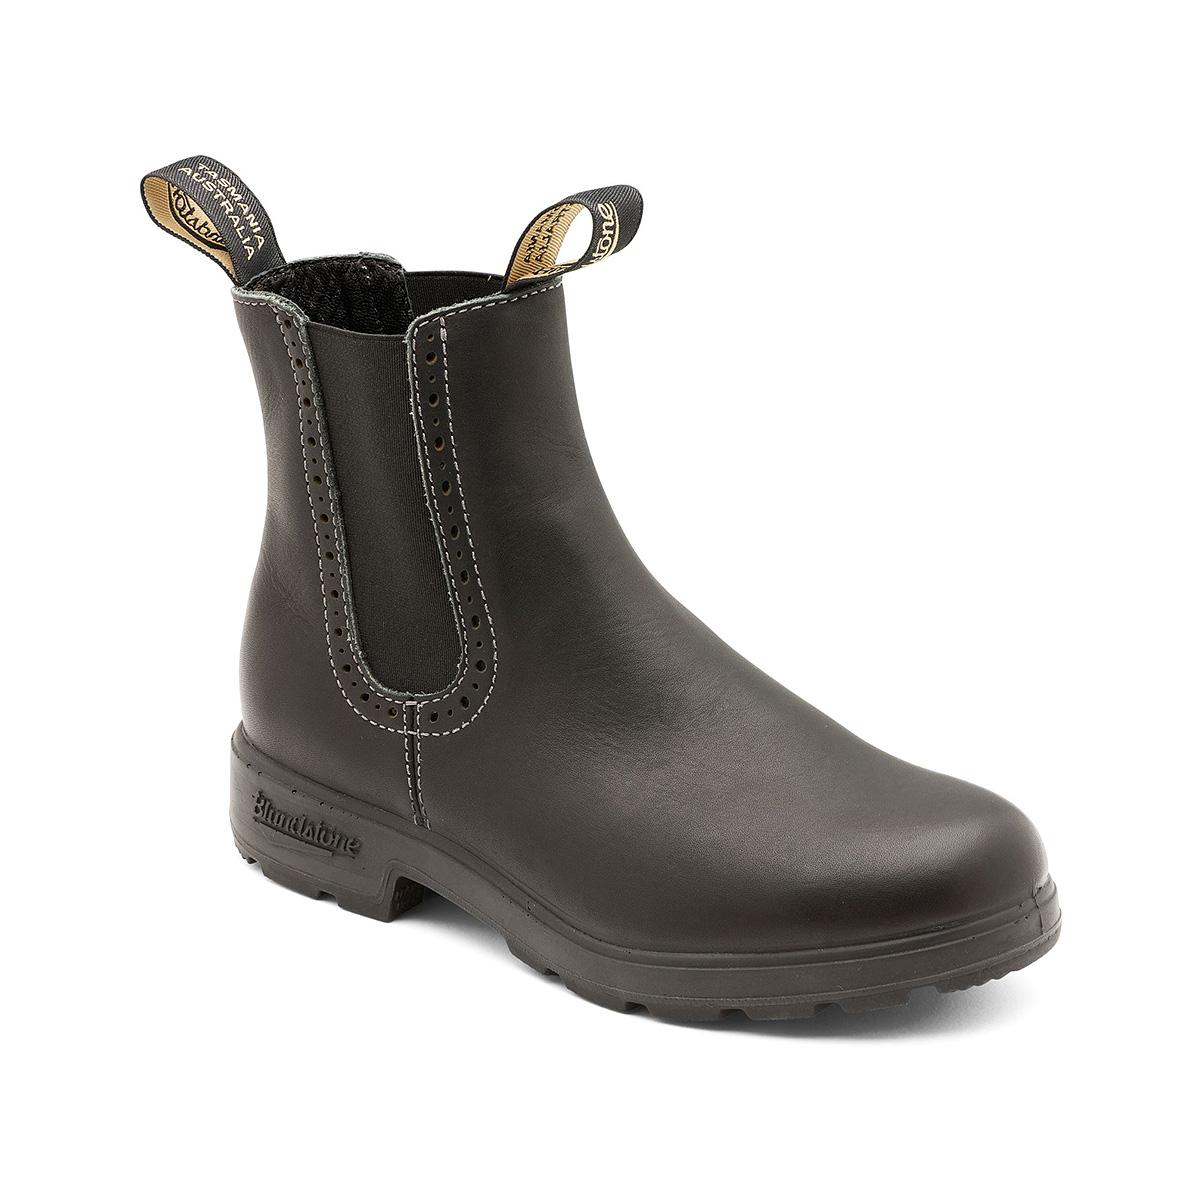 boots similar to blundstone